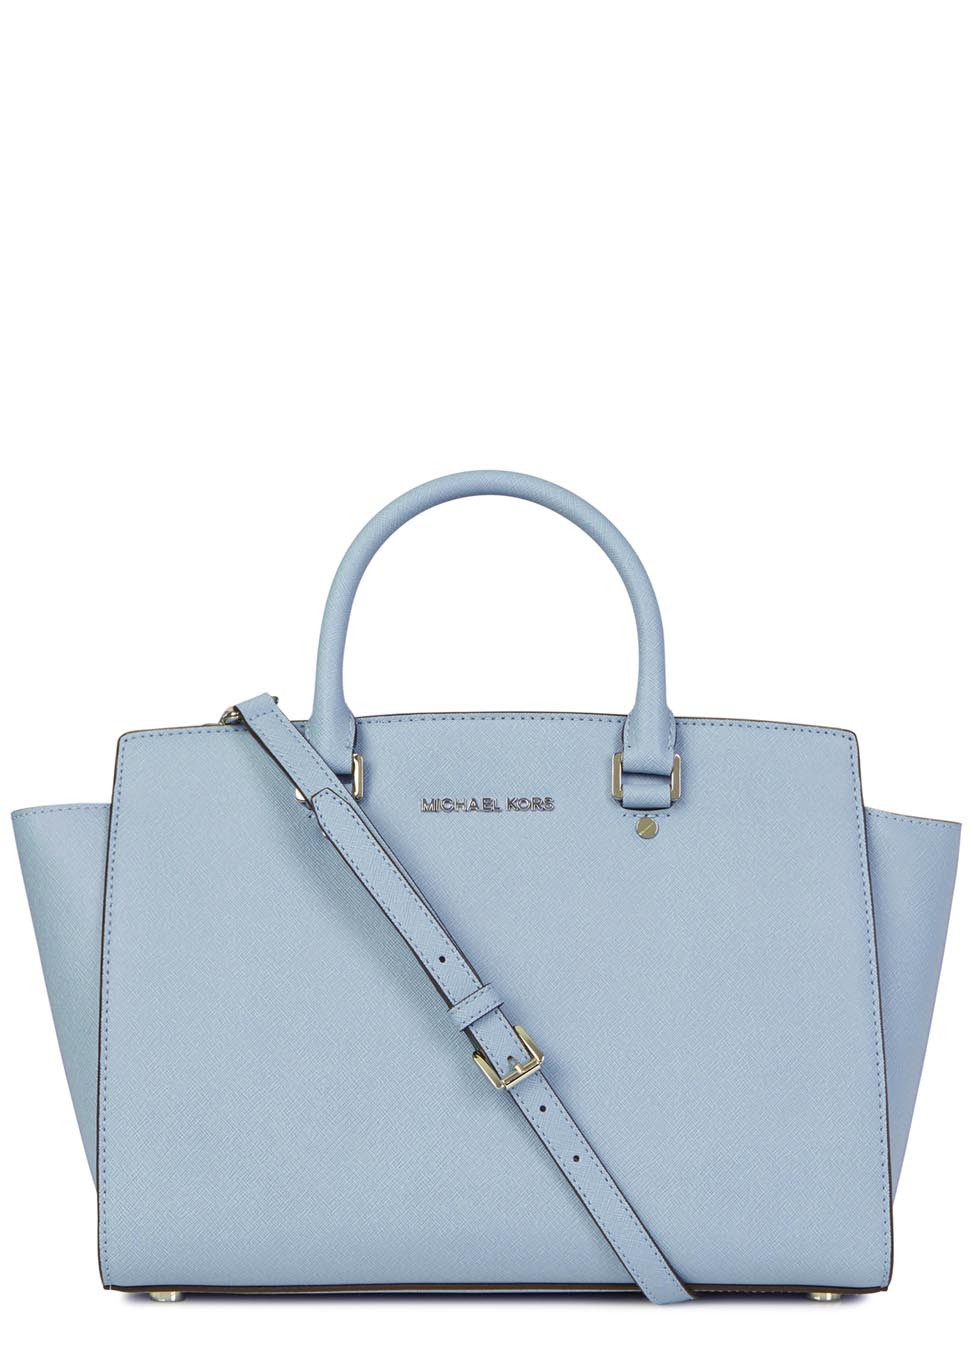 Michael Kors Selma Light Blue Saffiano Leather Tote in Blue | Lyst